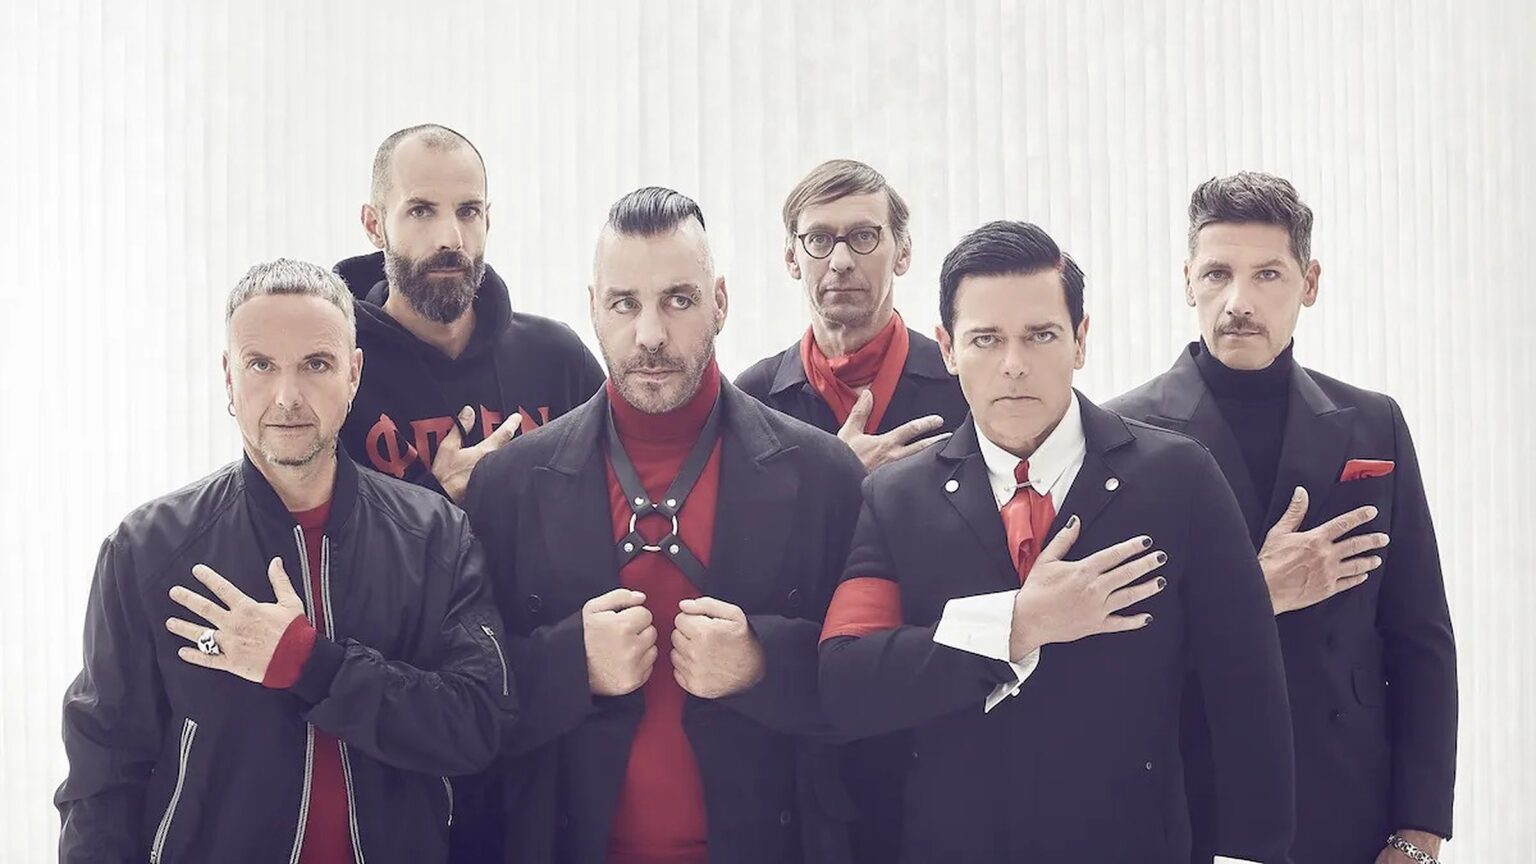 Did the members of Rammstein really groom their fans for sex? Take a look at the newest headlines around the music world!